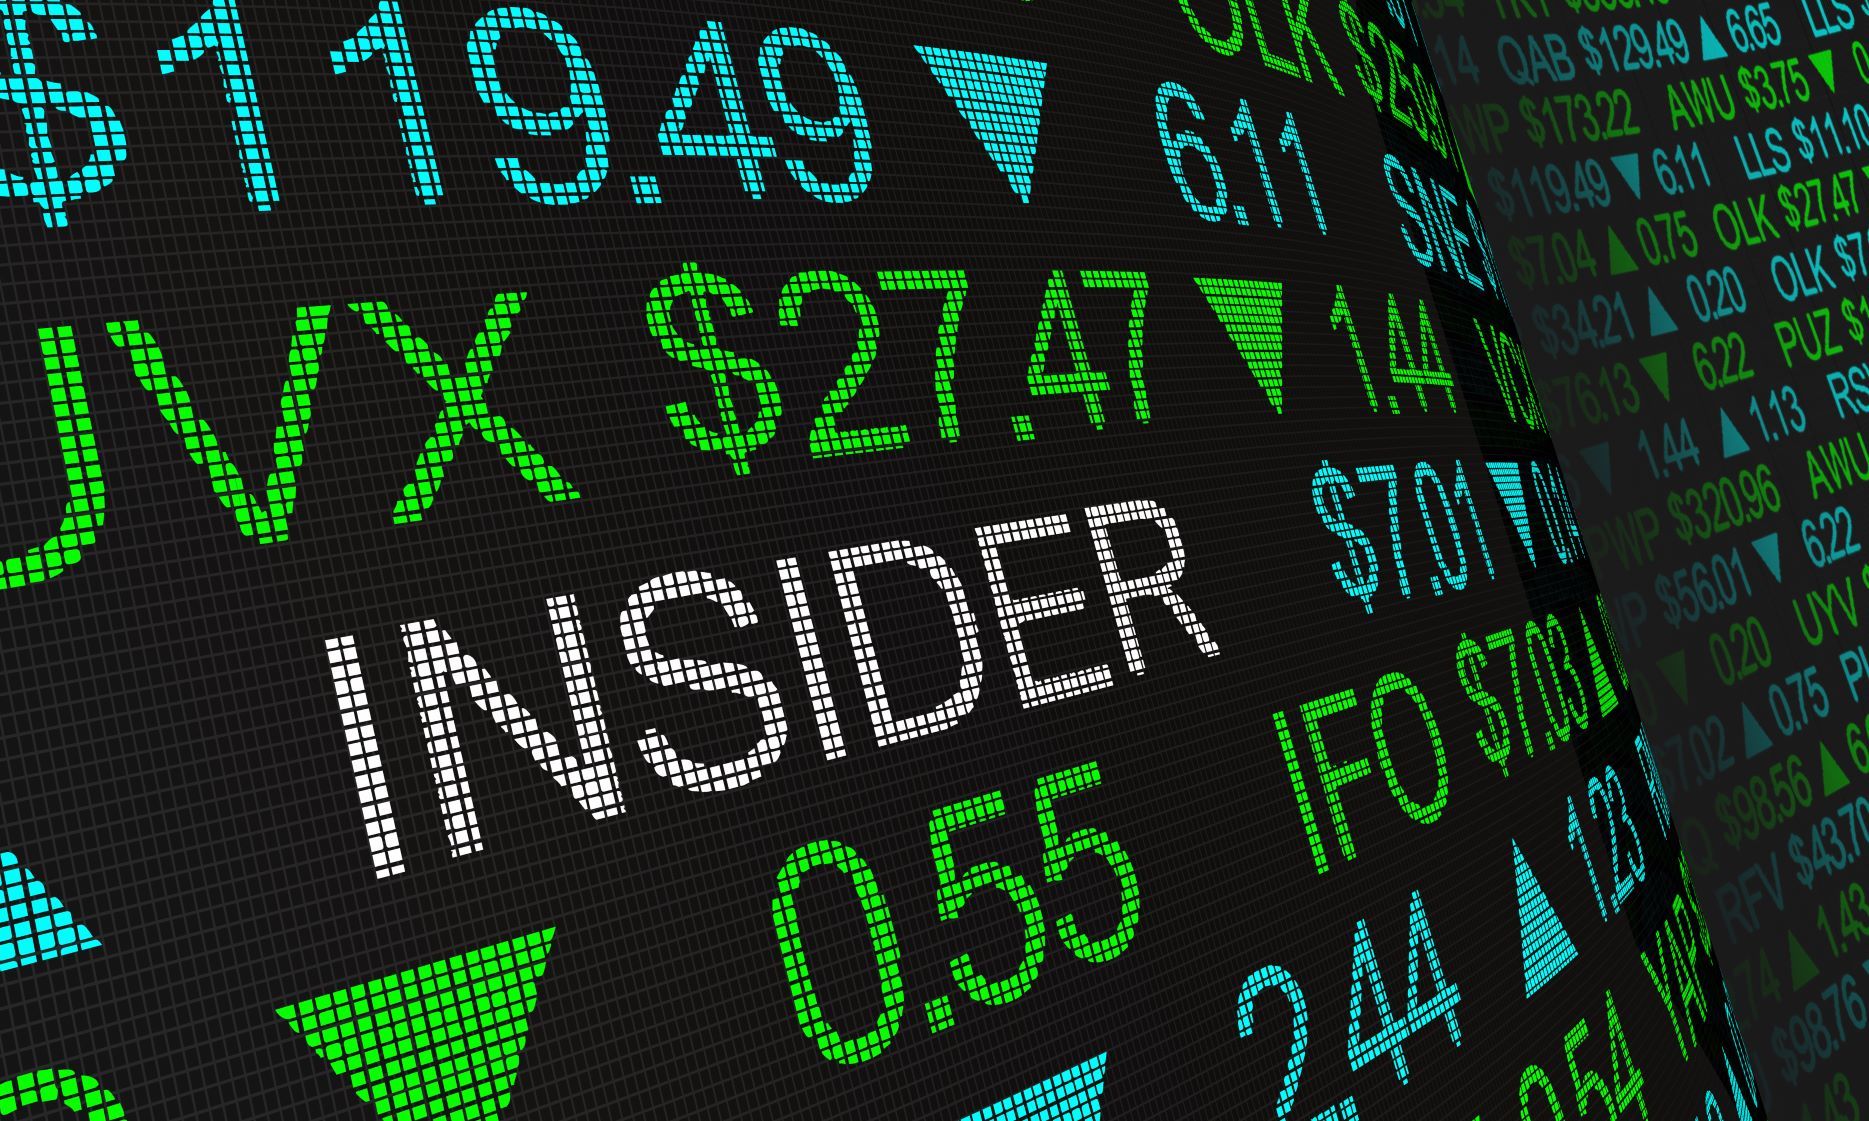 Understanding the Consequences of Insider Trading